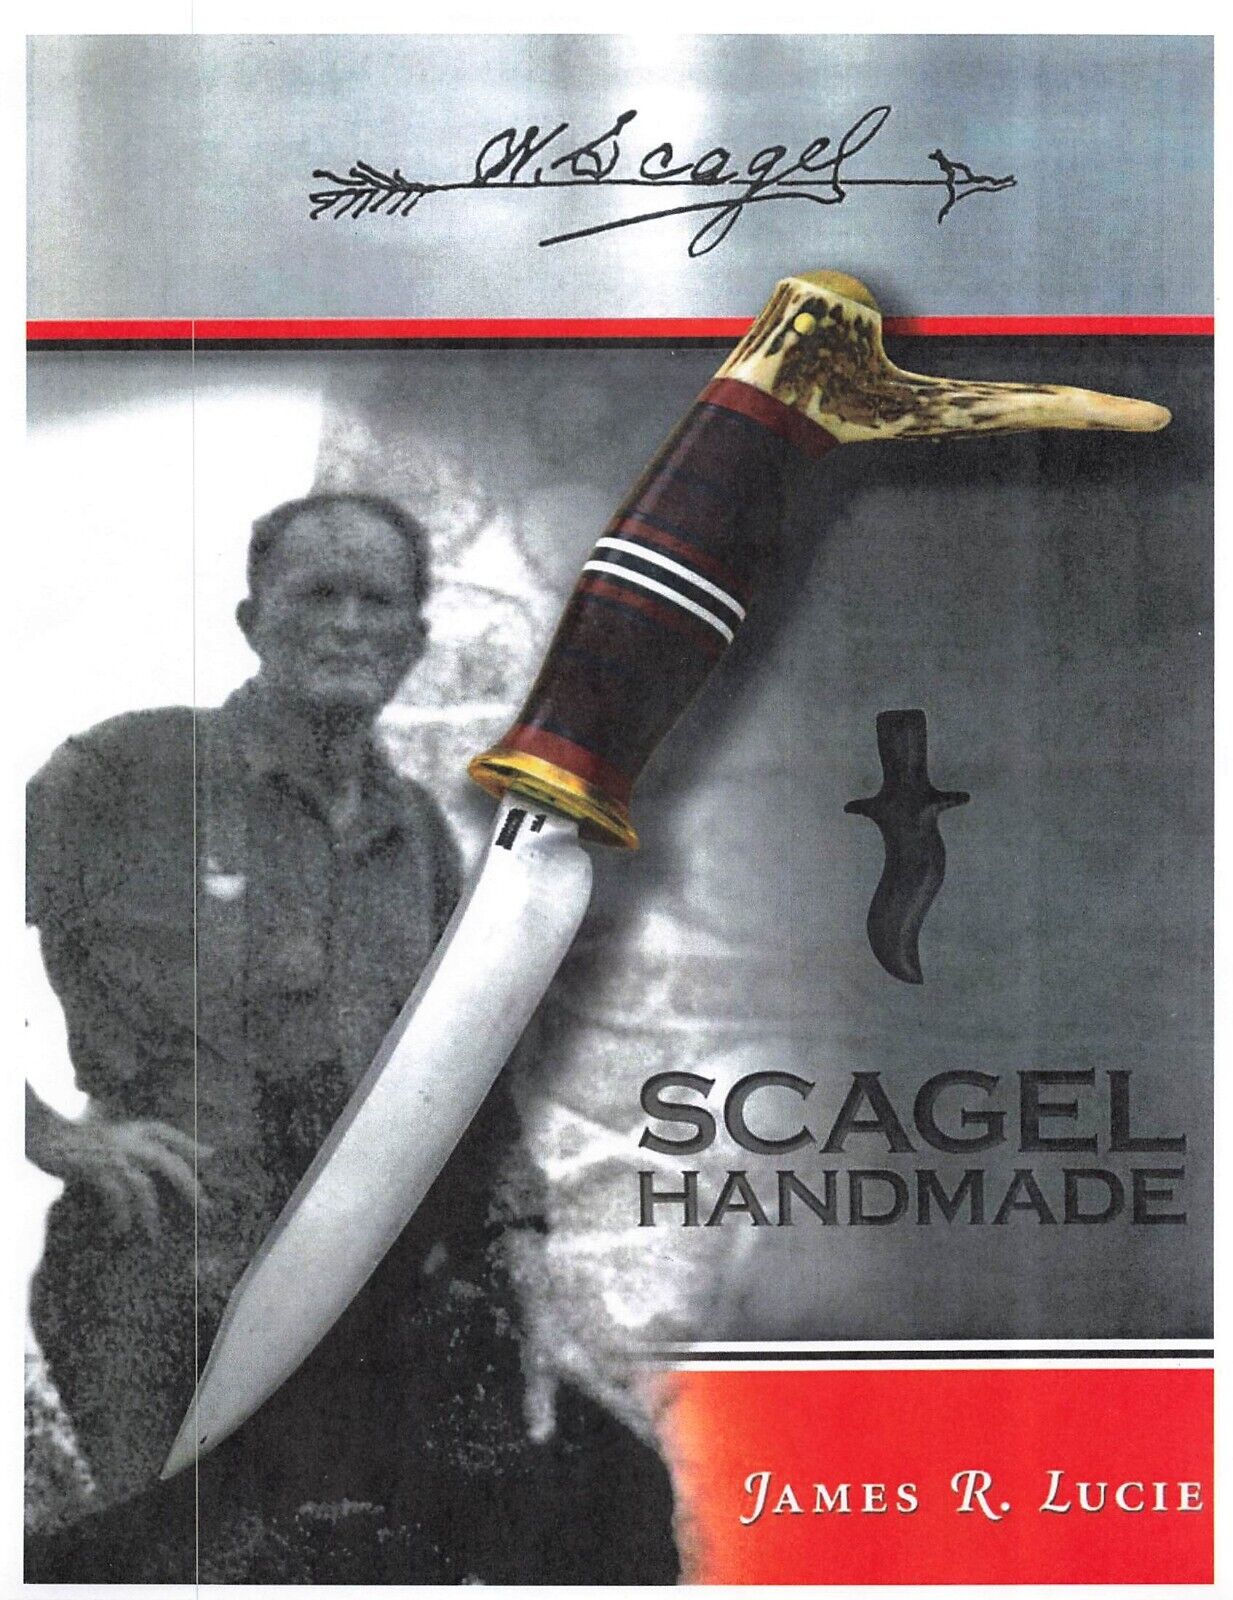 Scagel Handmade, a biography of Bill Scagel, famous knifemaker, by Dr. Jim Lucie